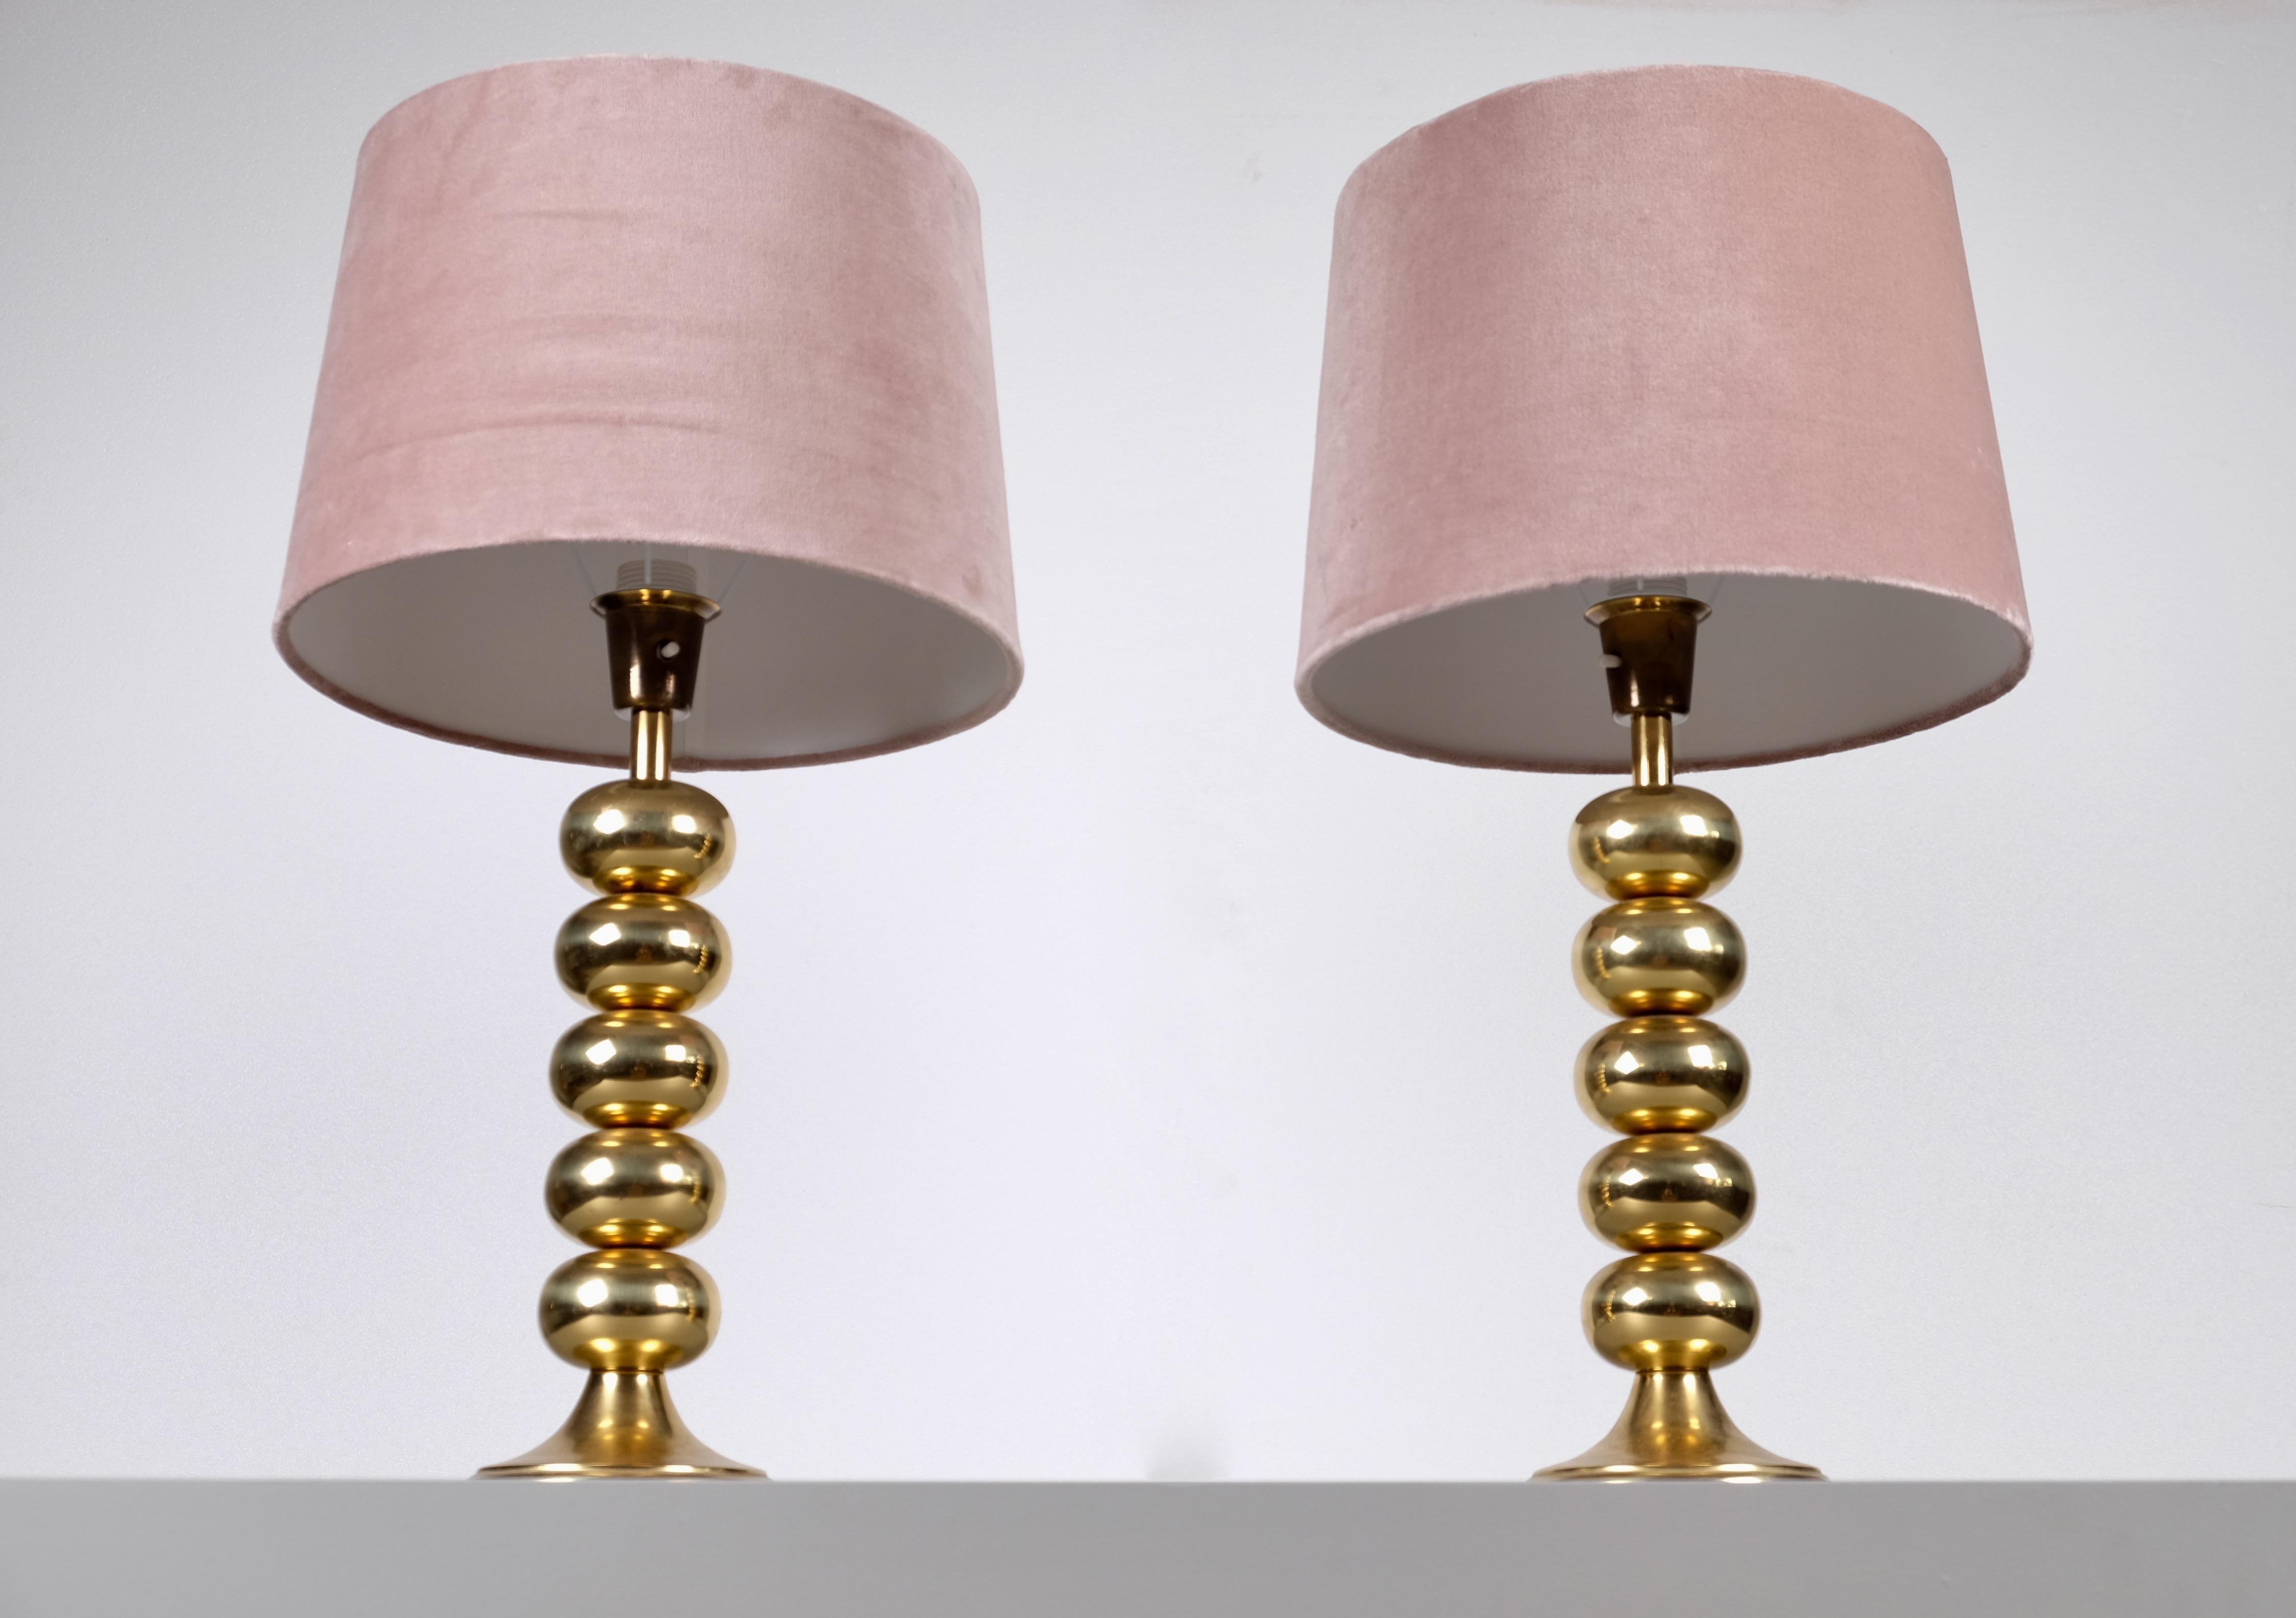 Scandinavian Modern Pair of Brass Table Lamps by Aneta, Sweden, 1970s For Sale